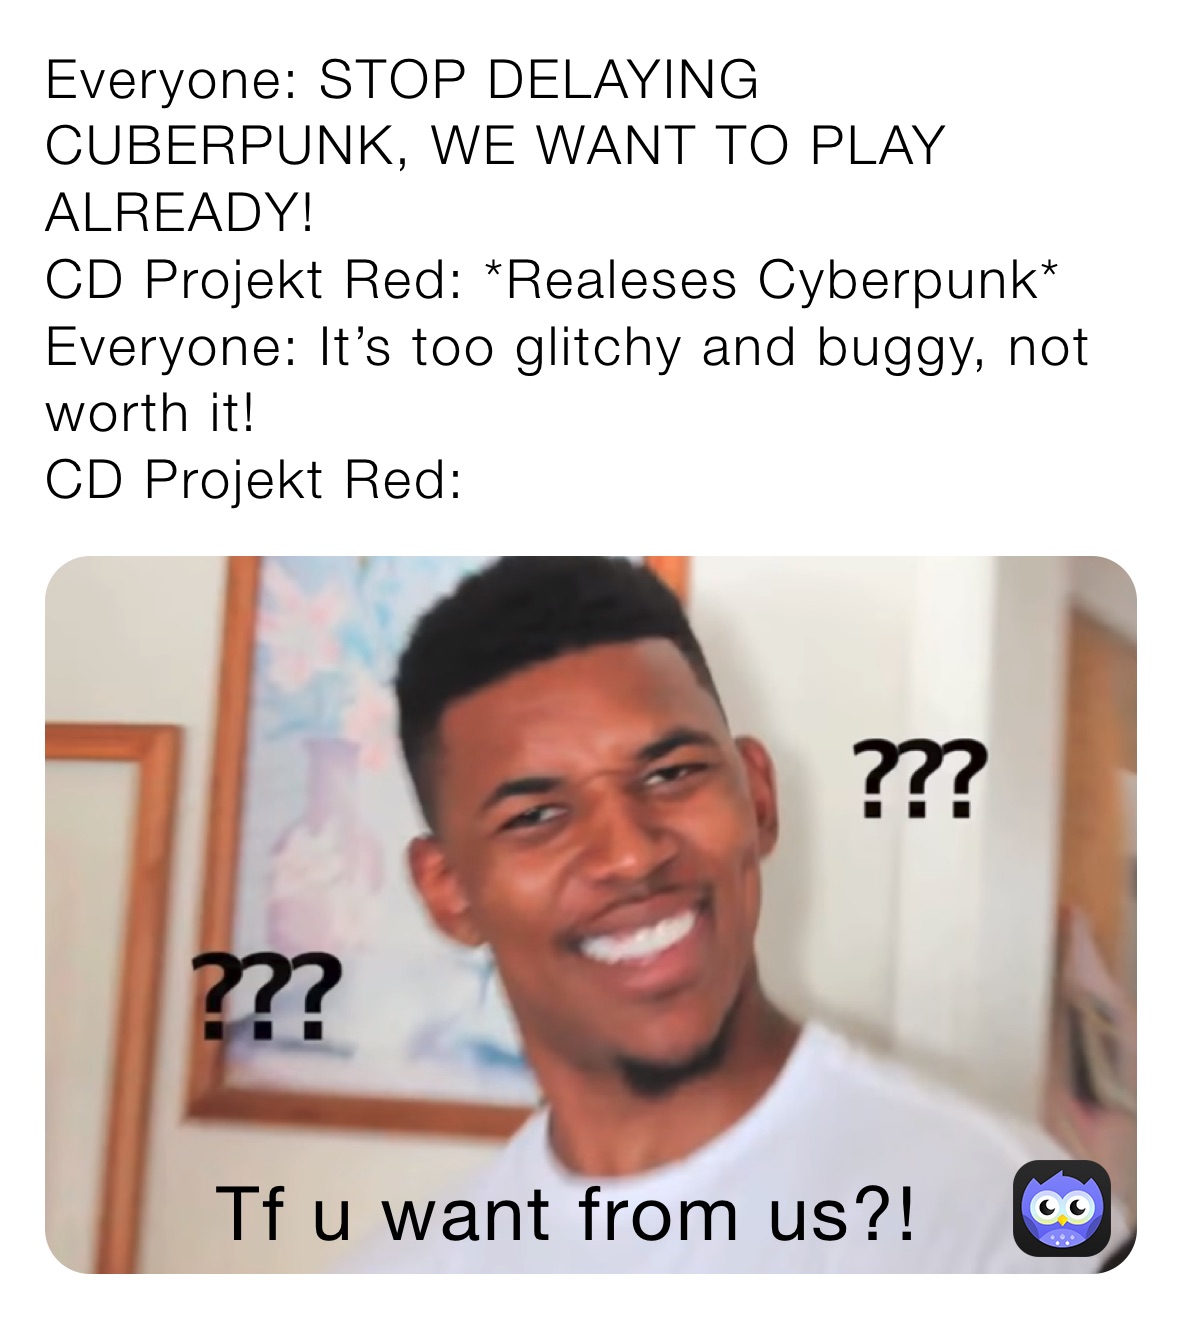 Everyone: STOP DELAYING CUBERPUNK, WE WANT TO PLAY ALREADY!
CD Projekt Red: *Realeses Cyberpunk*
Everyone: It’s too glitchy and buggy, not worth it!
CD Projekt Red: